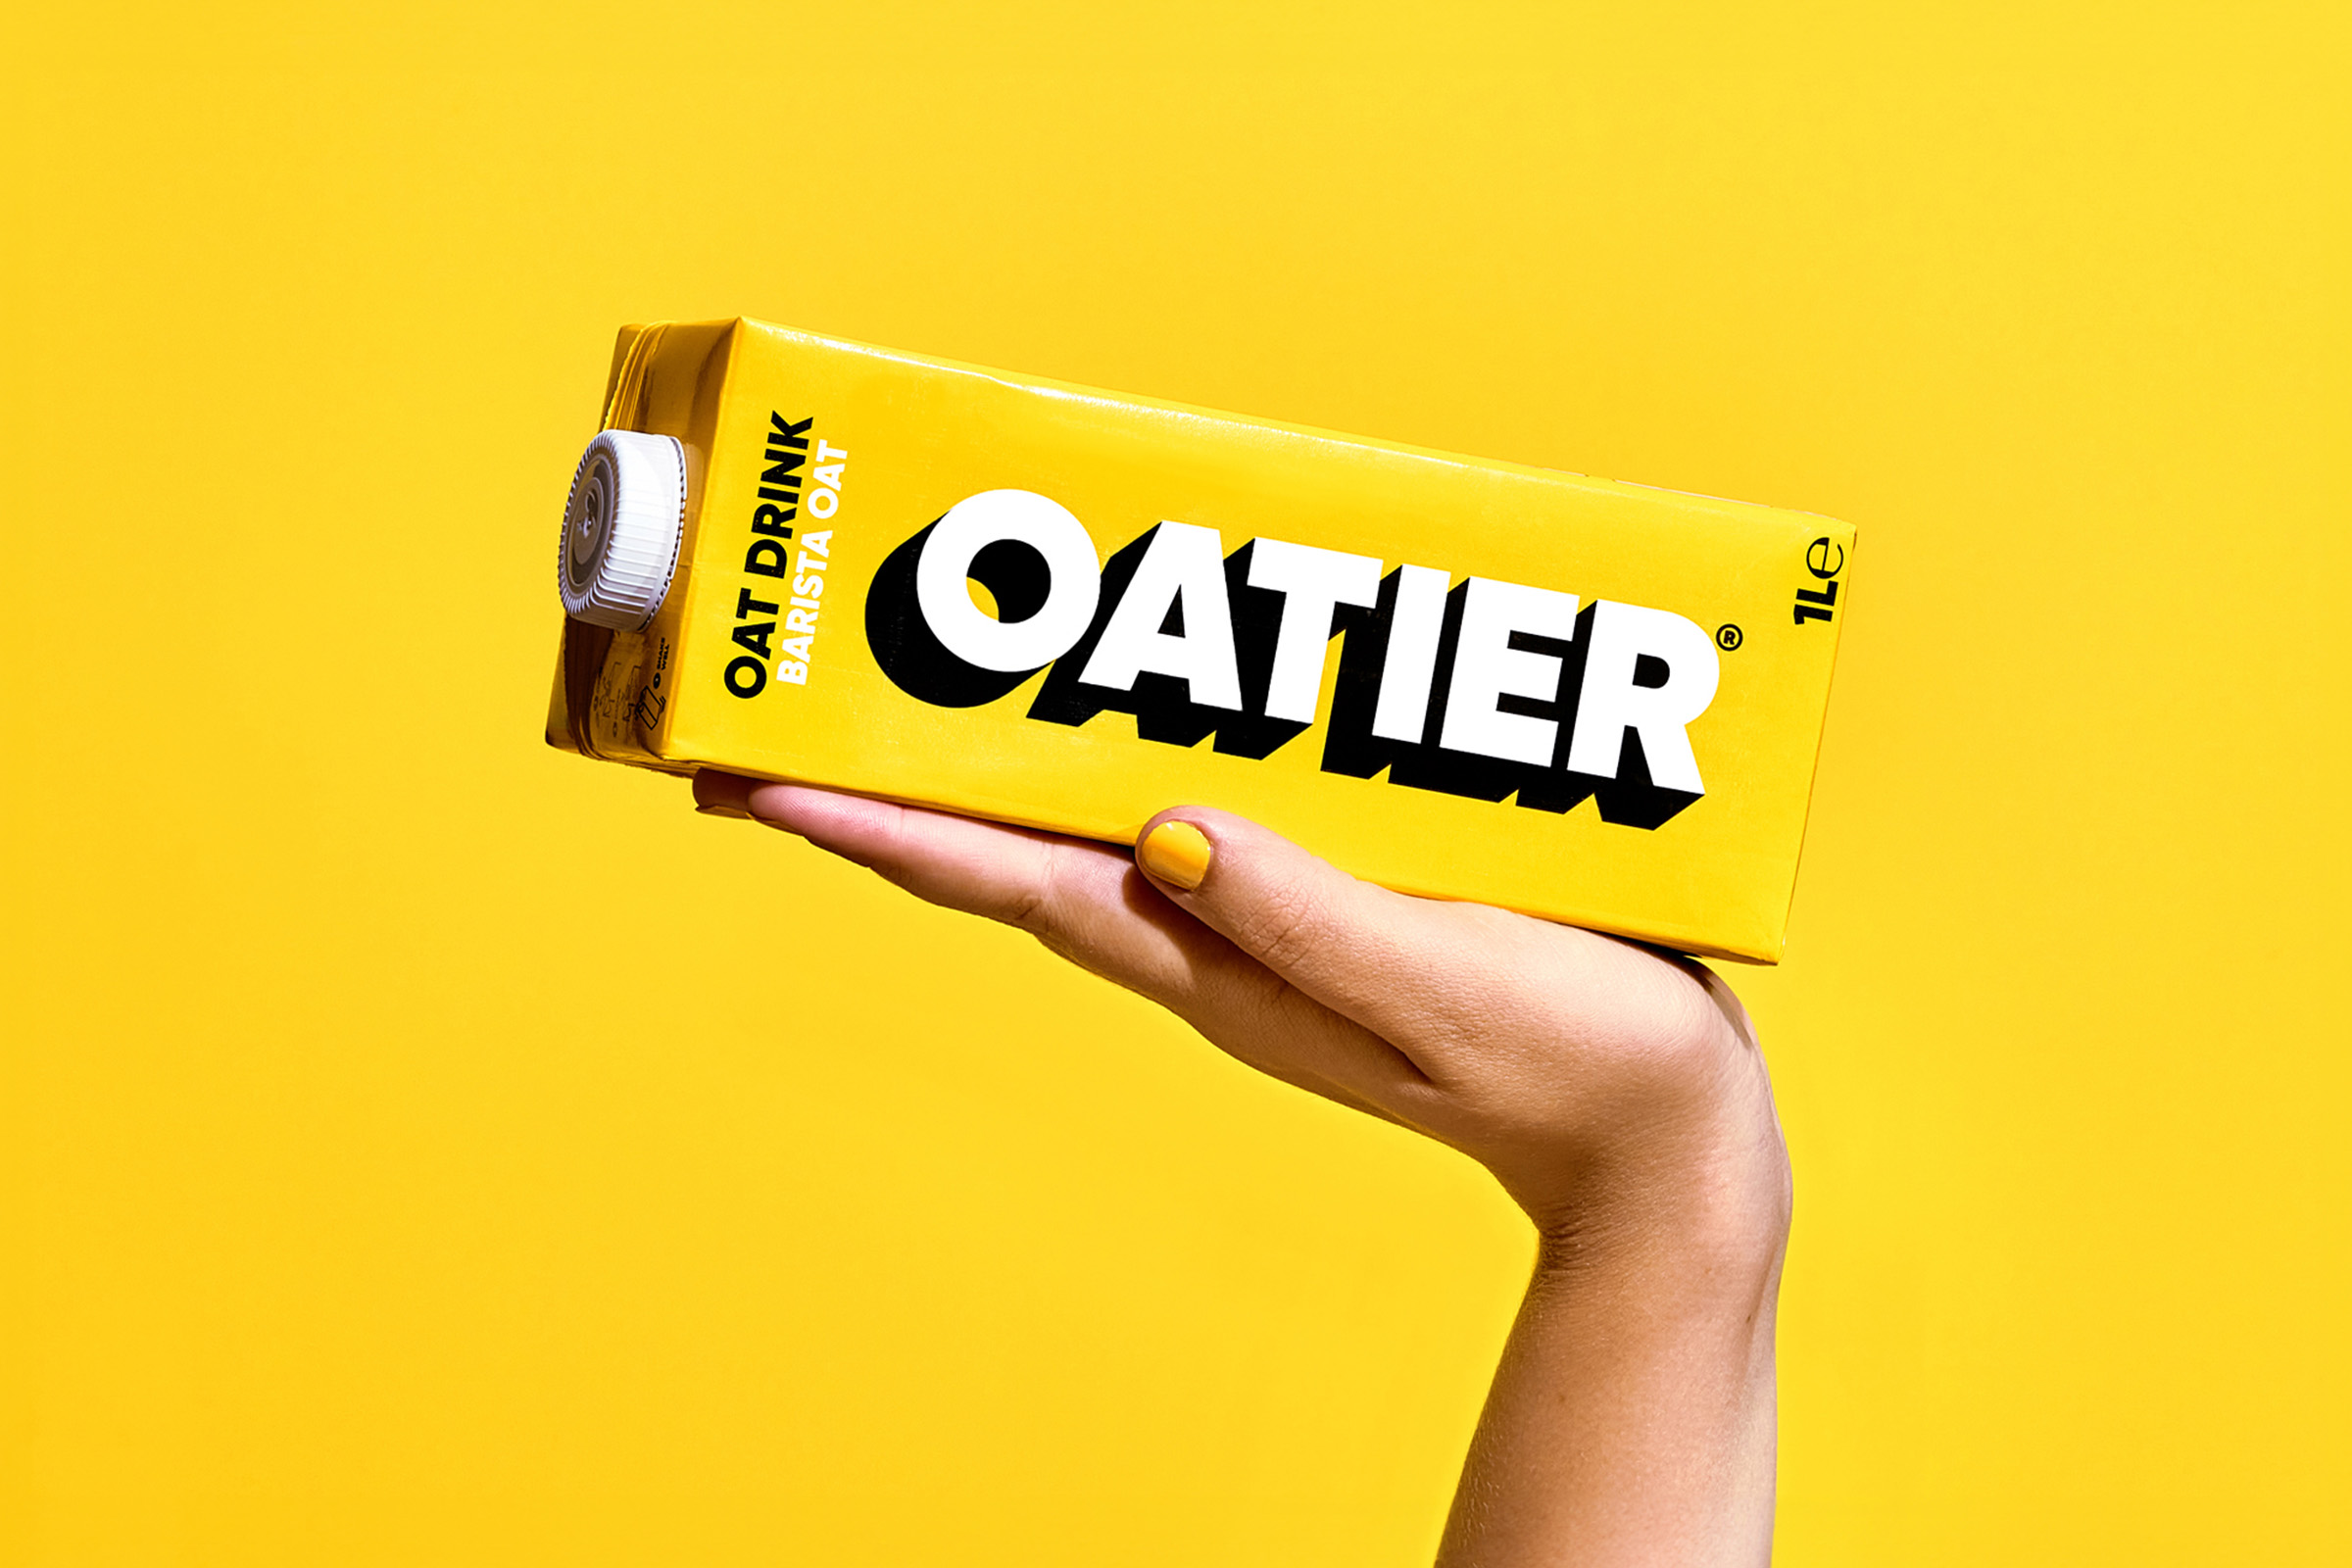 Oatier: Shaking Up the Oat Milk Market with 100% Irish Oats for Coffee Enthusiasts